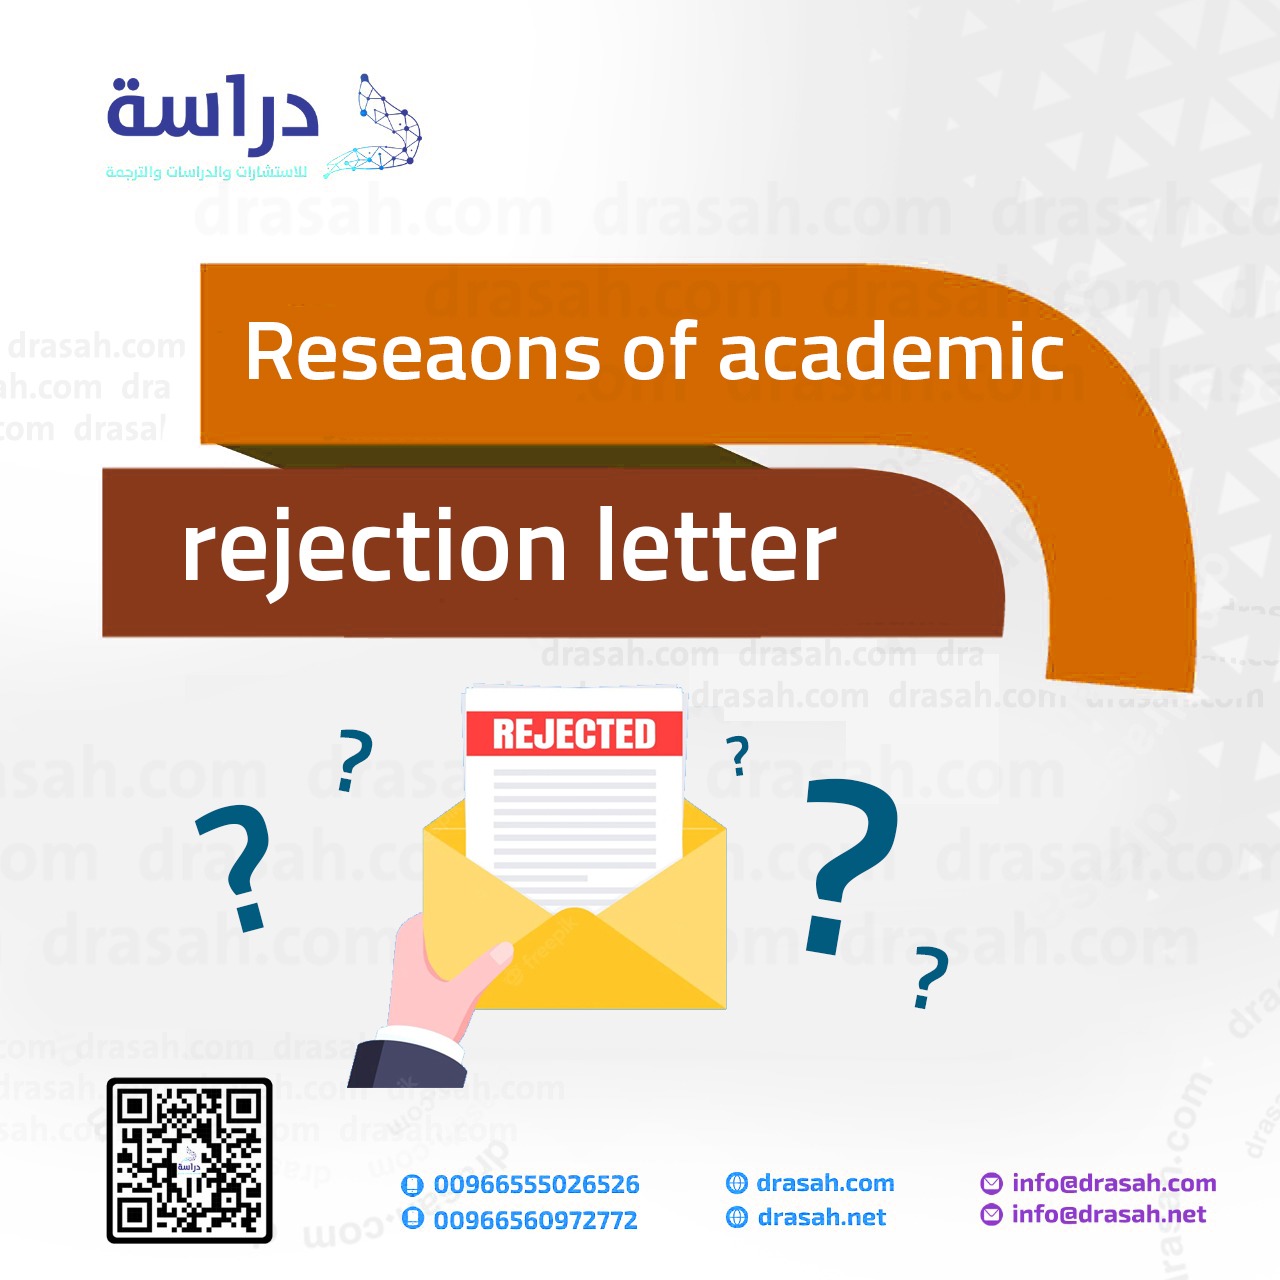 Reseaons of academic rejection letter